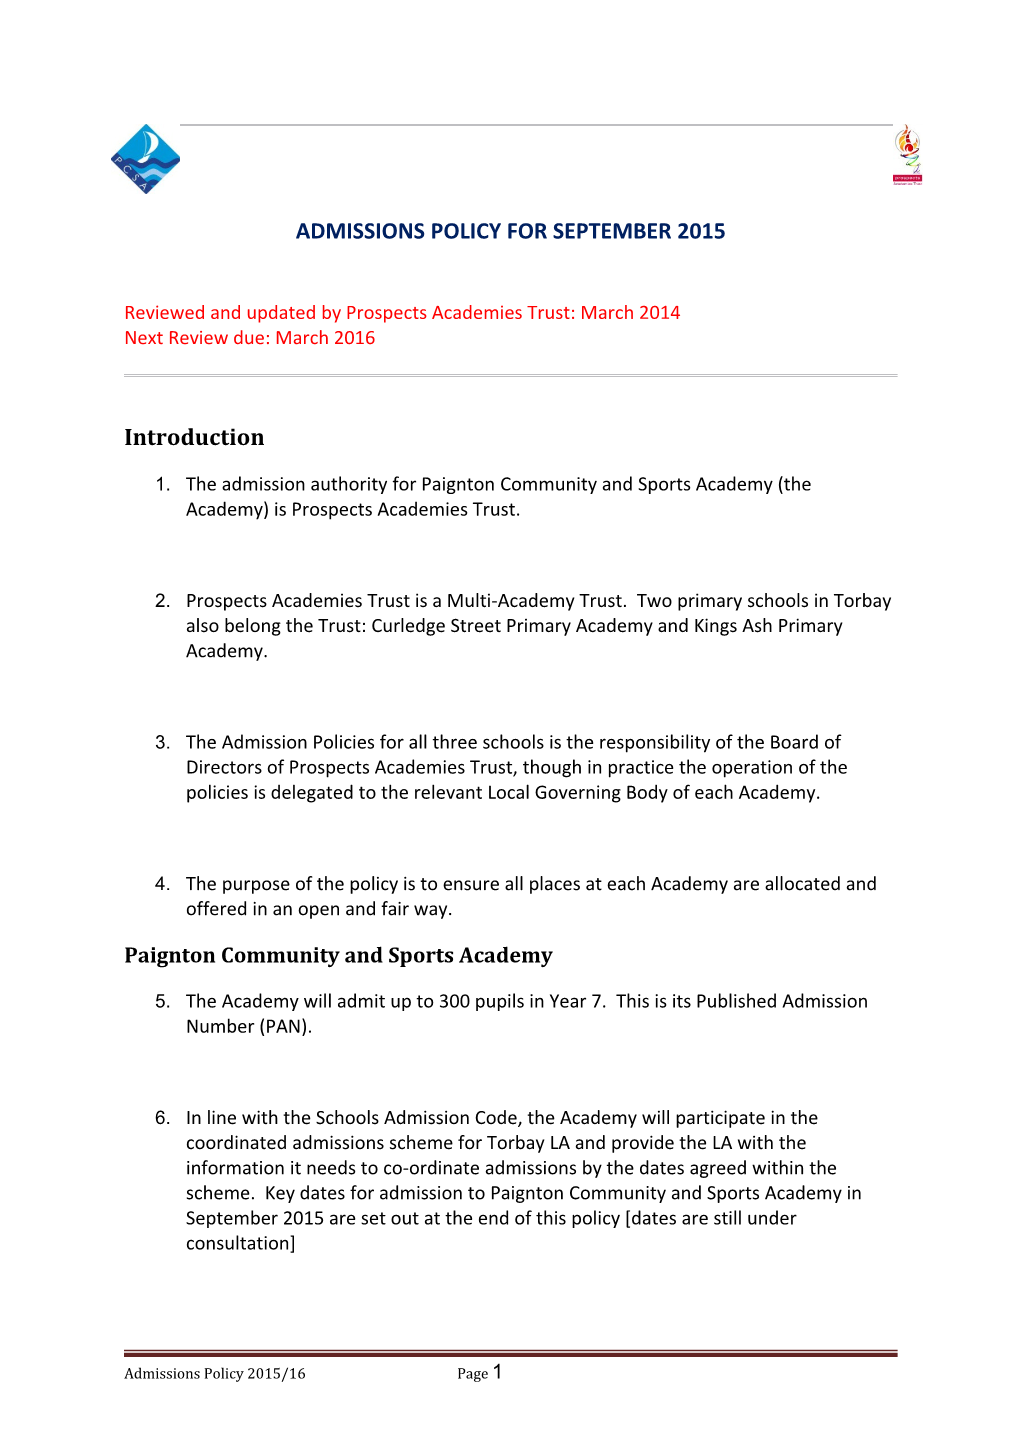 Admissions Policy for September 2015